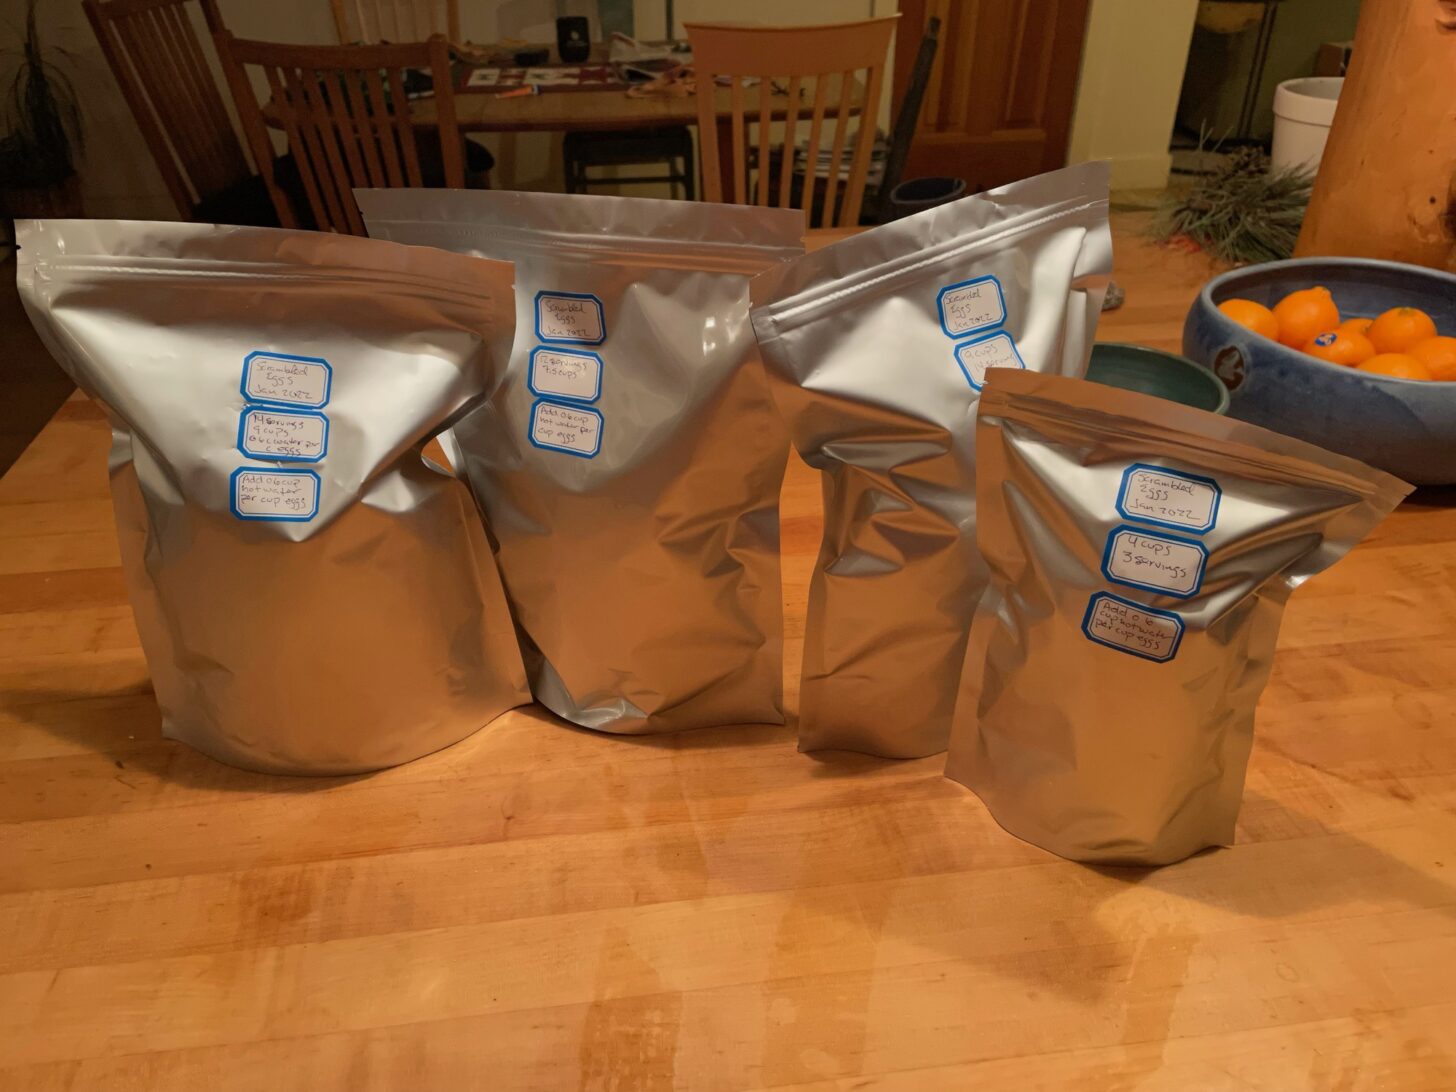 A collection of mylar bags filled with freeze-dried food